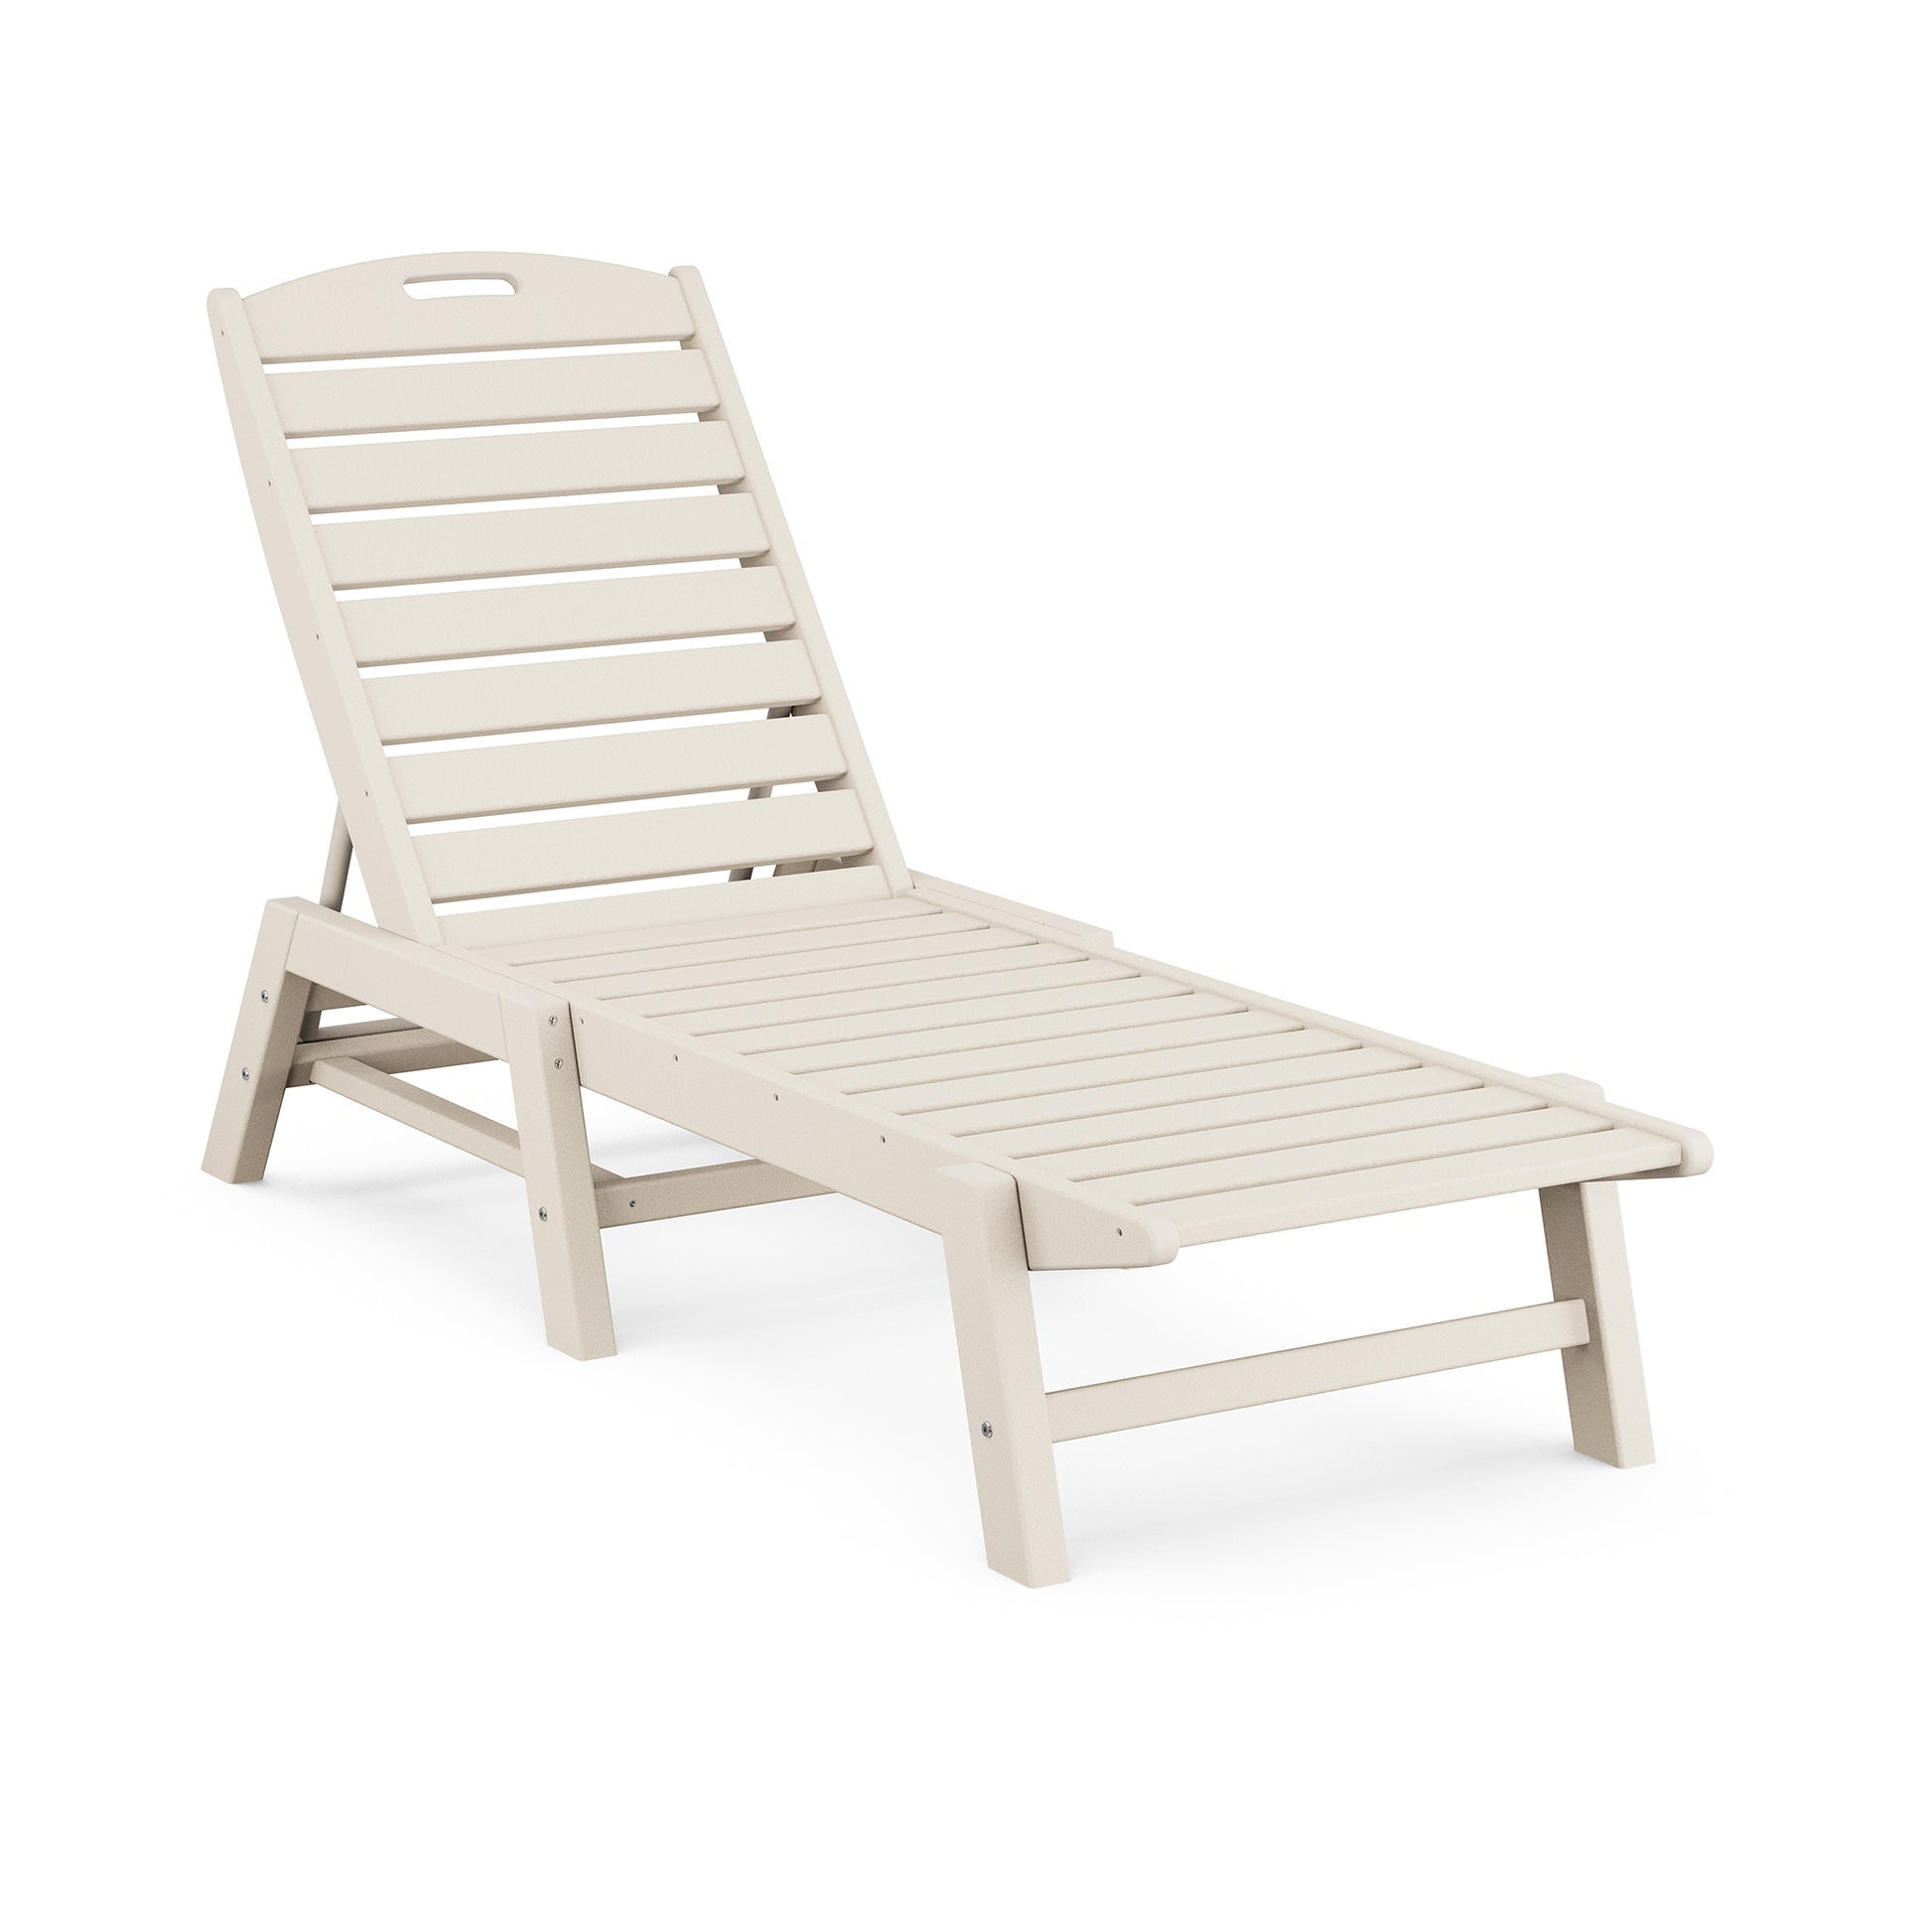 A single beige POLYWOOD® Nautical Armless Chaise Lounge is displayed against a white background. The chair, part of the POLYWOOD® Nautical Outdoor Furniture Collection, is styled in an adjustable